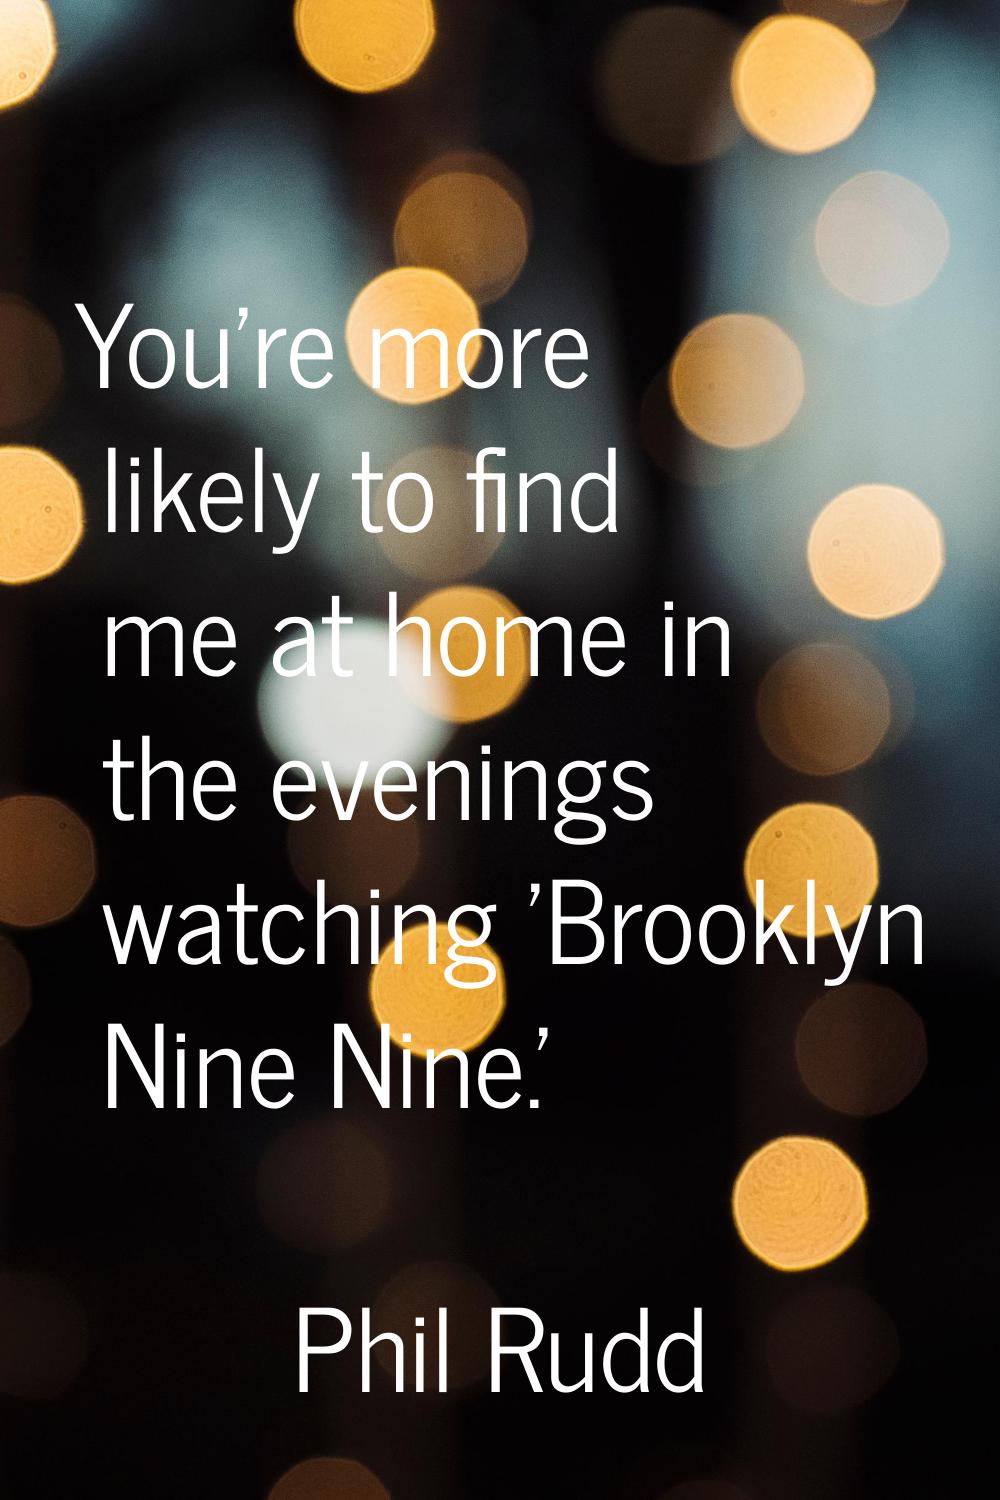 You're more likely to find me at home in the evenings watching 'Brooklyn Nine Nine.'